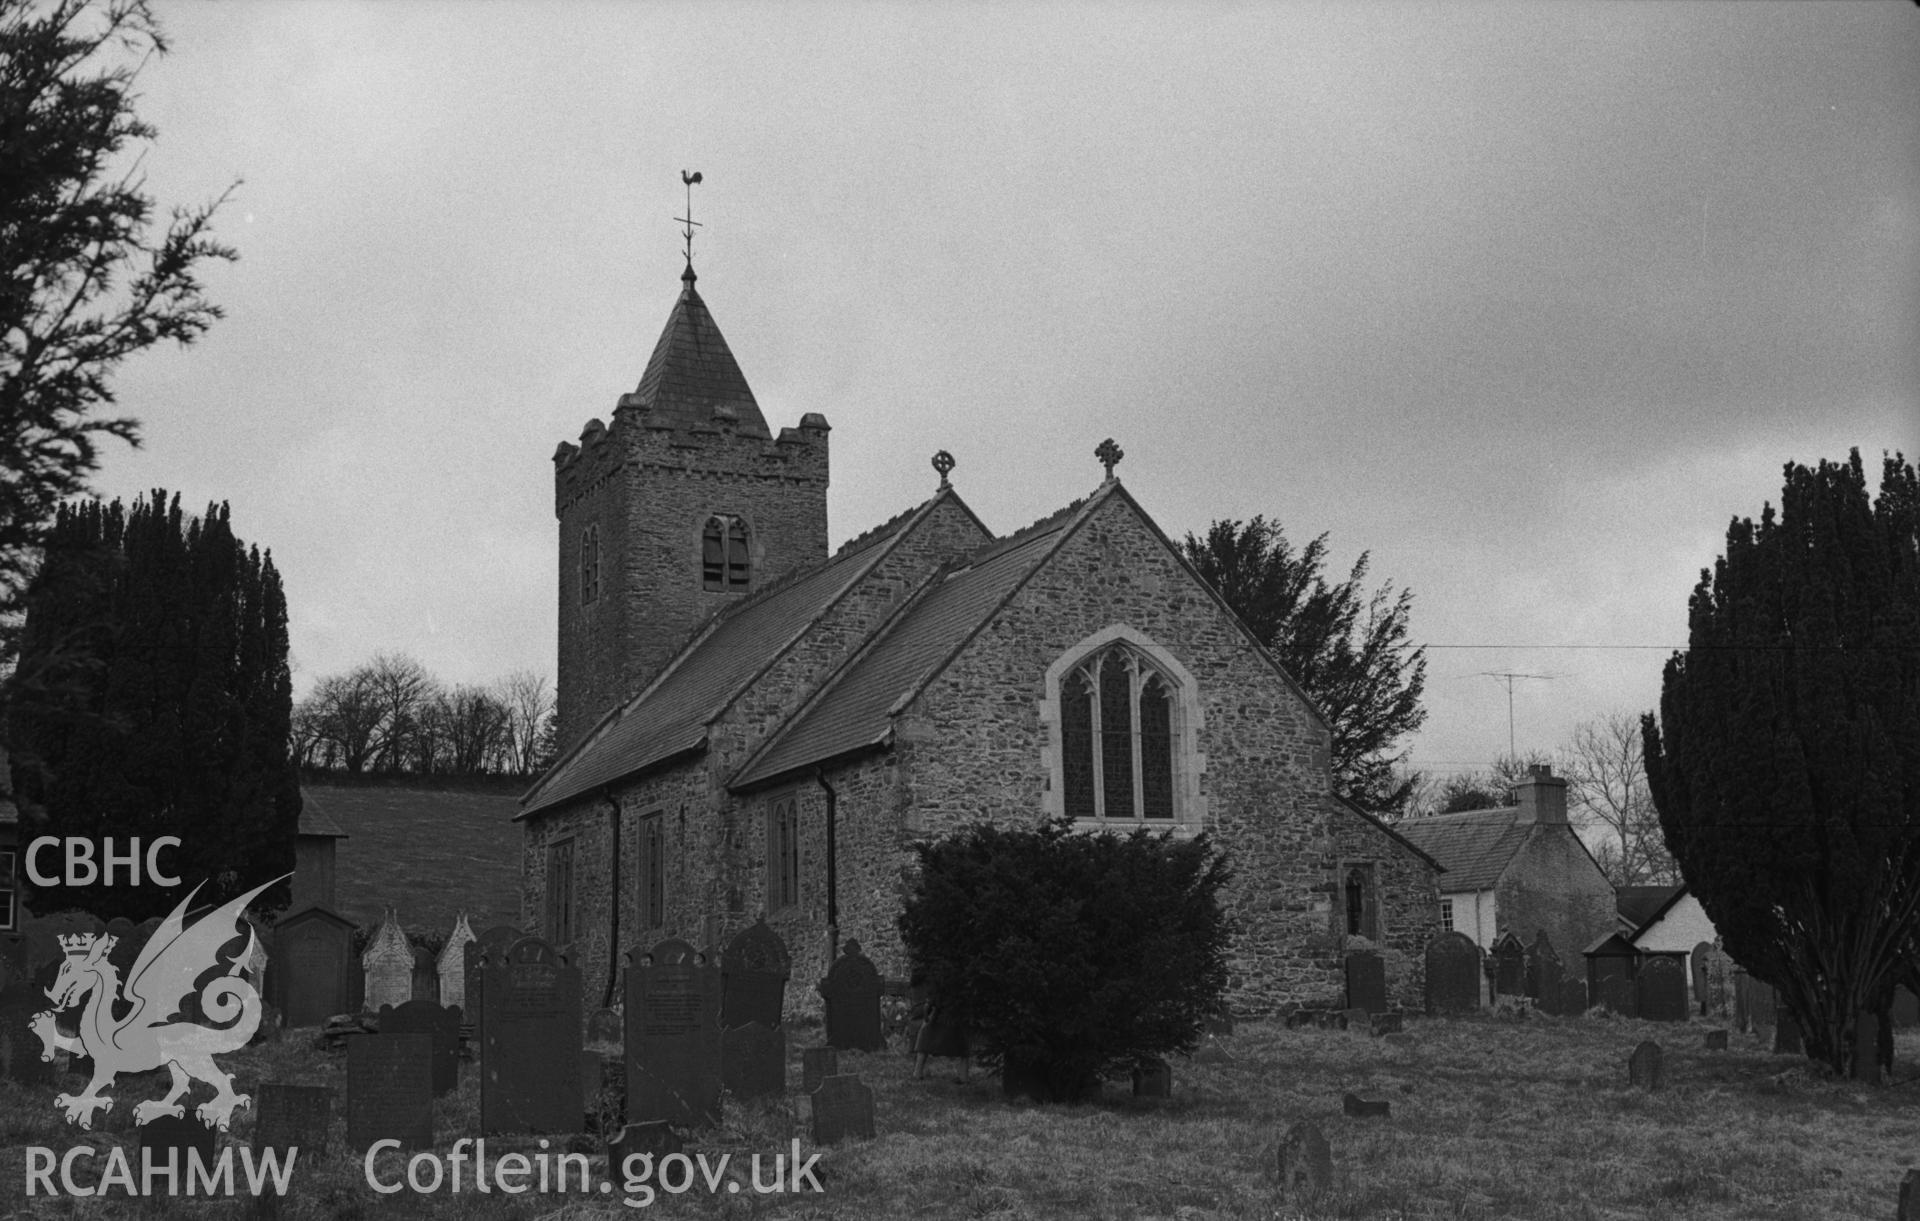 Digital copy of a black and white negative showing exterior view of St Gwynin's church, Llanwnnen. Photographed in April 1963 by Arthur O. Chater from Grid Reference SN 5336 4725, looking west north west.